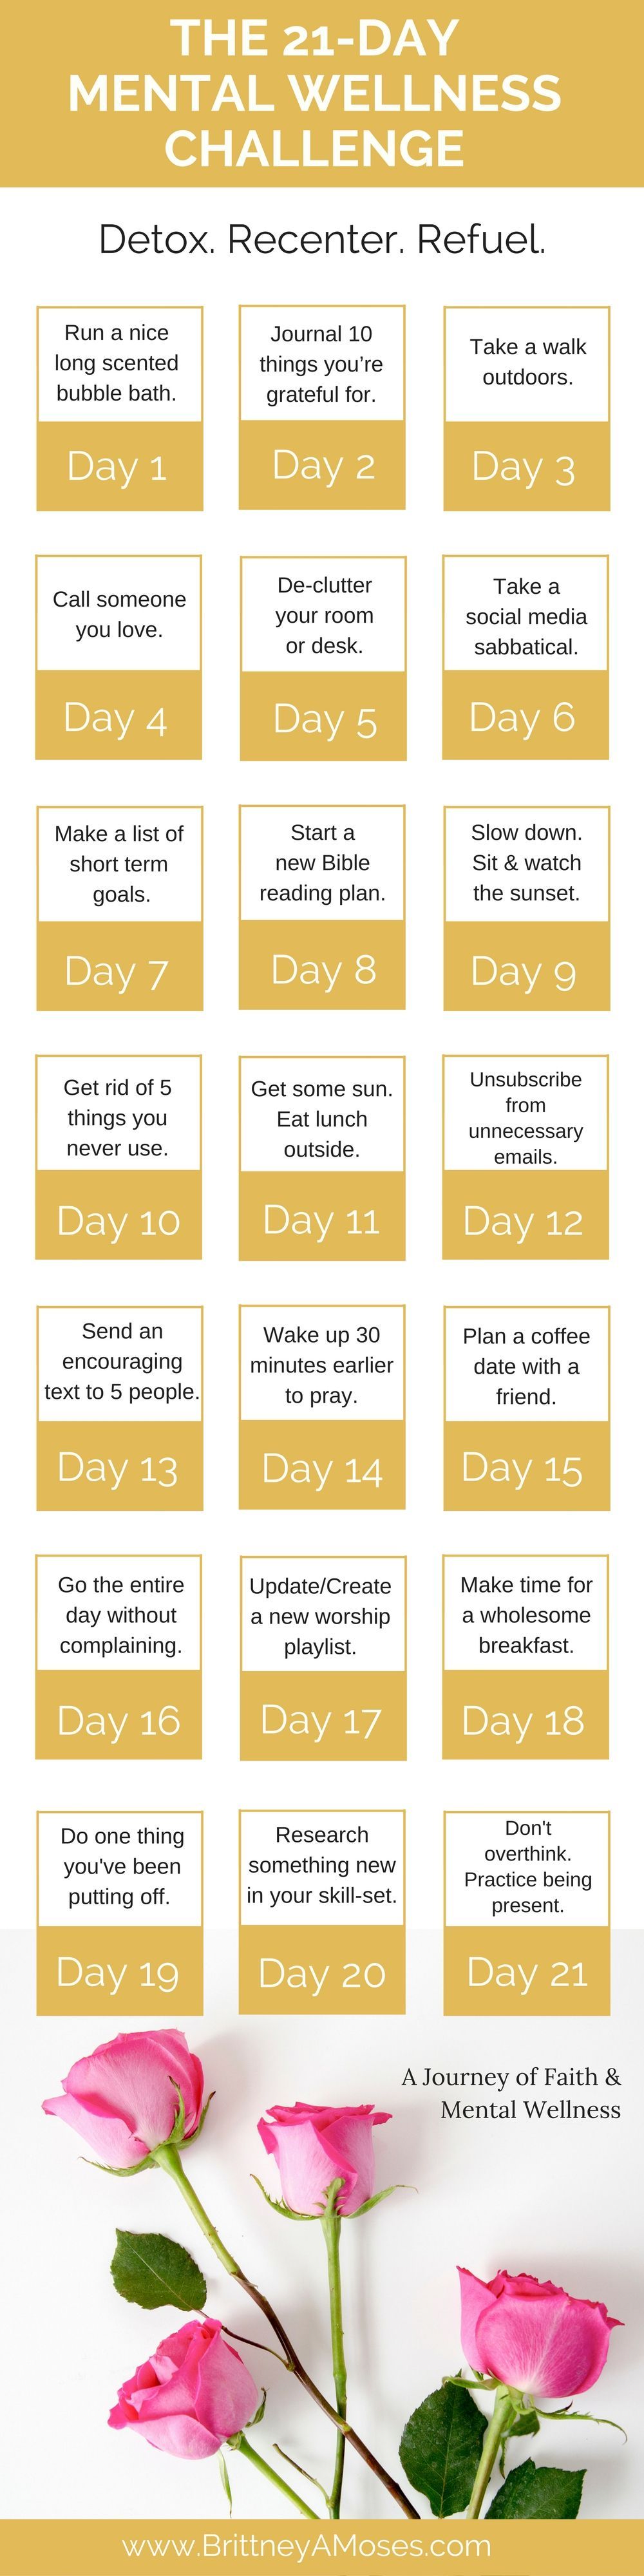 21-Day Mental Wellness Challenge! -Brittney Moses